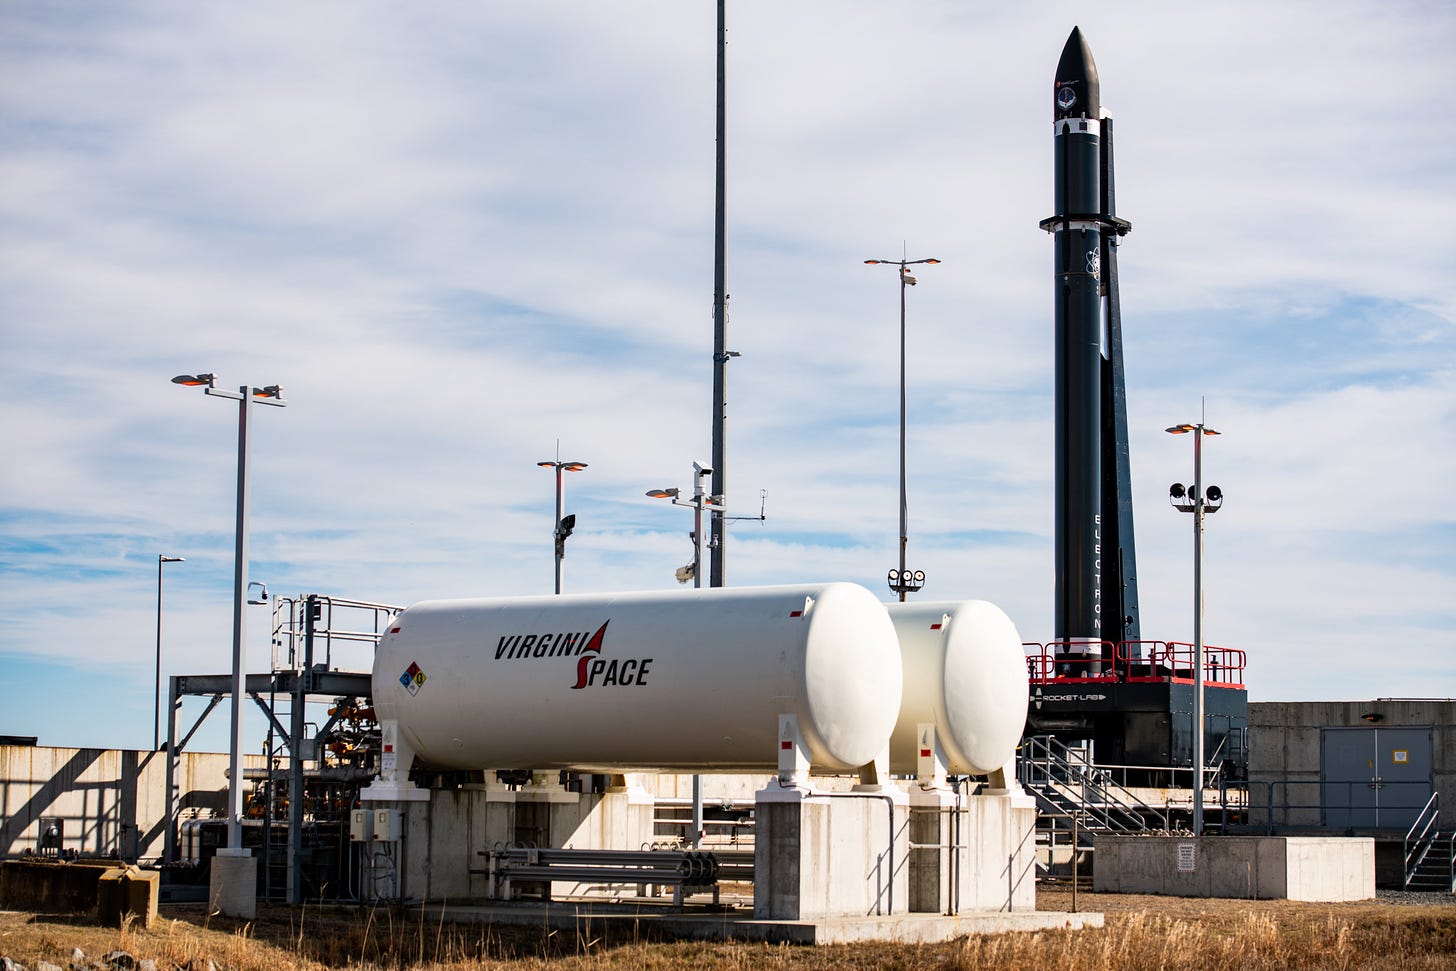 The new Rocket Lab launch site in Virginia. An Electron rocket in the background ready for launch (image from Rocket Lab Twitter feed).